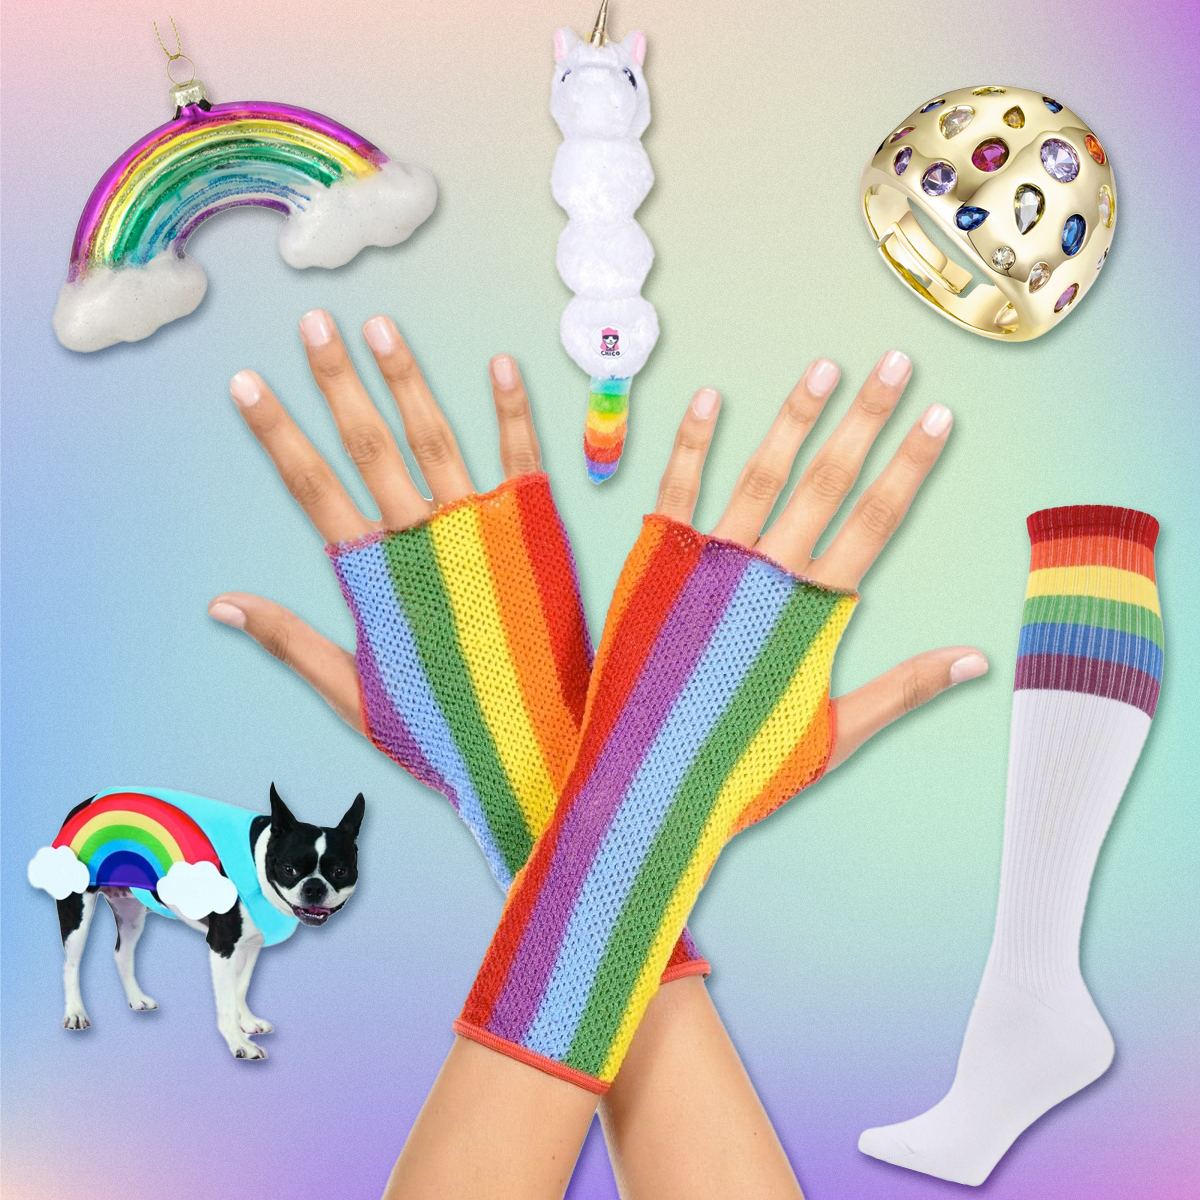 It's Still Pride” Is a Great Excuse to Shop for These Rainbow Things